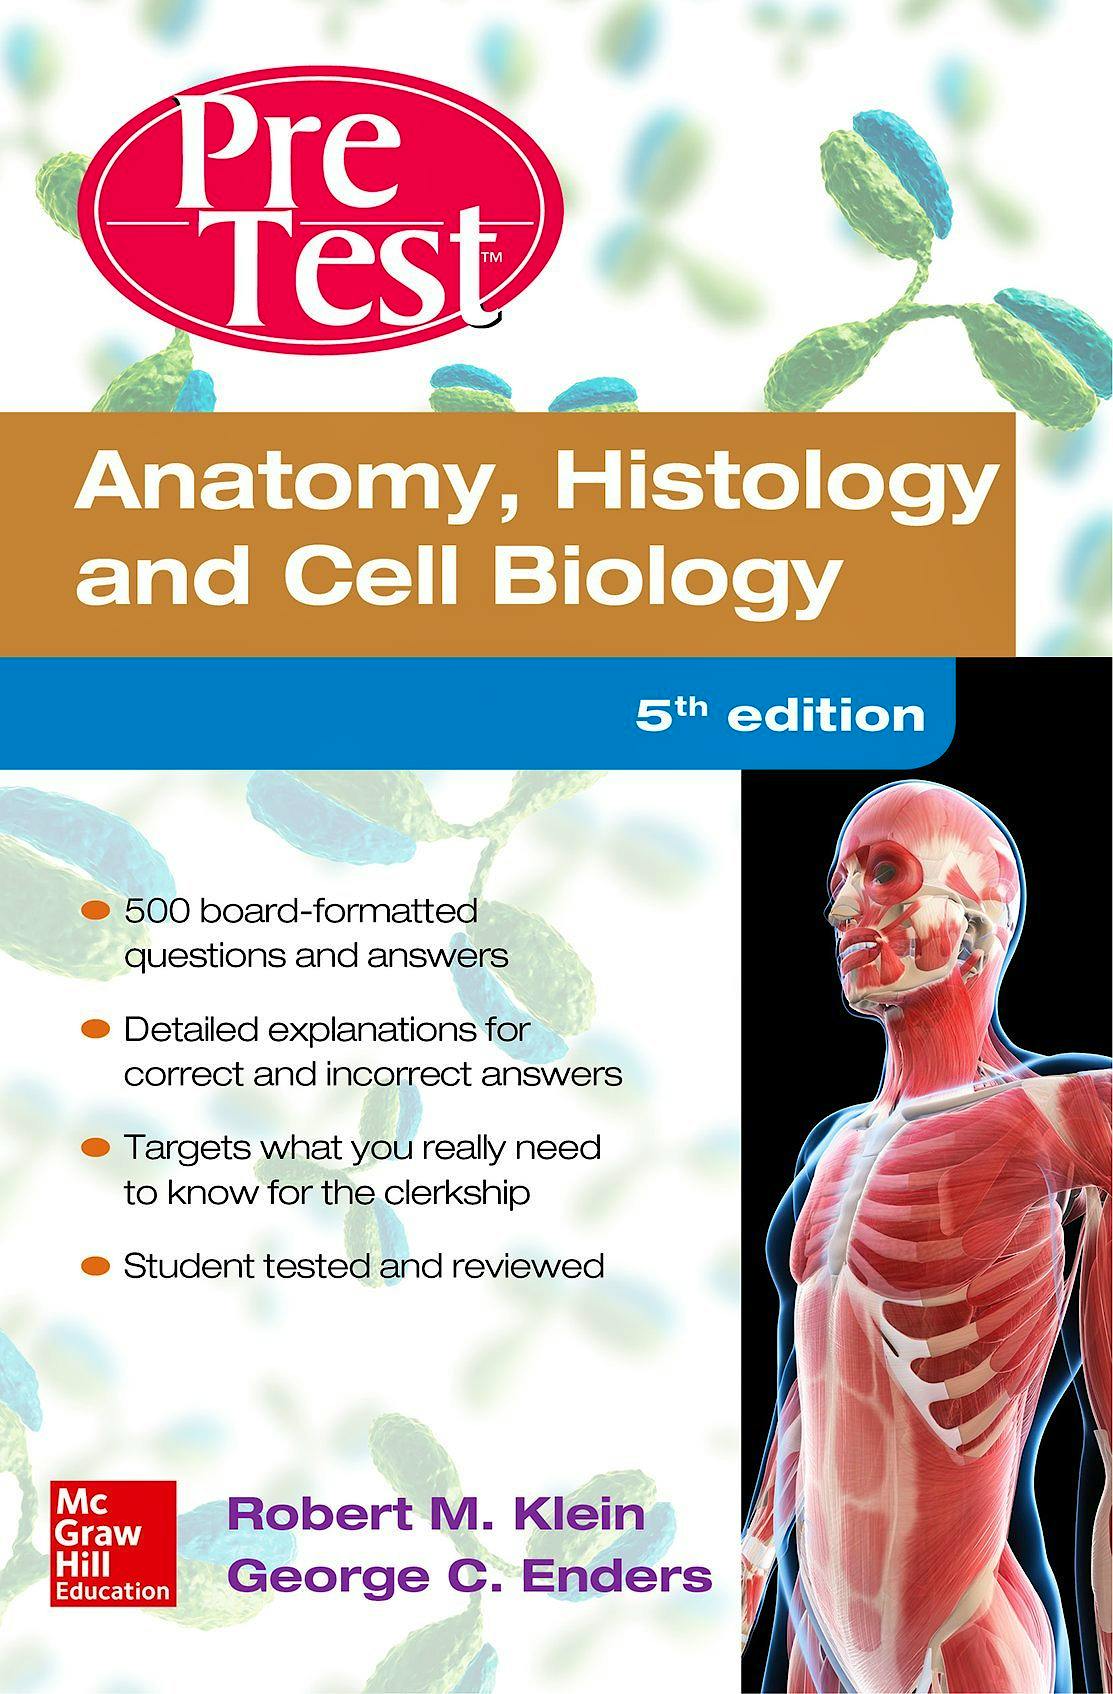 Portada del libro 9780071791403 Anatomy Histology and Cell Biology Pretest Self-Assessment and Review